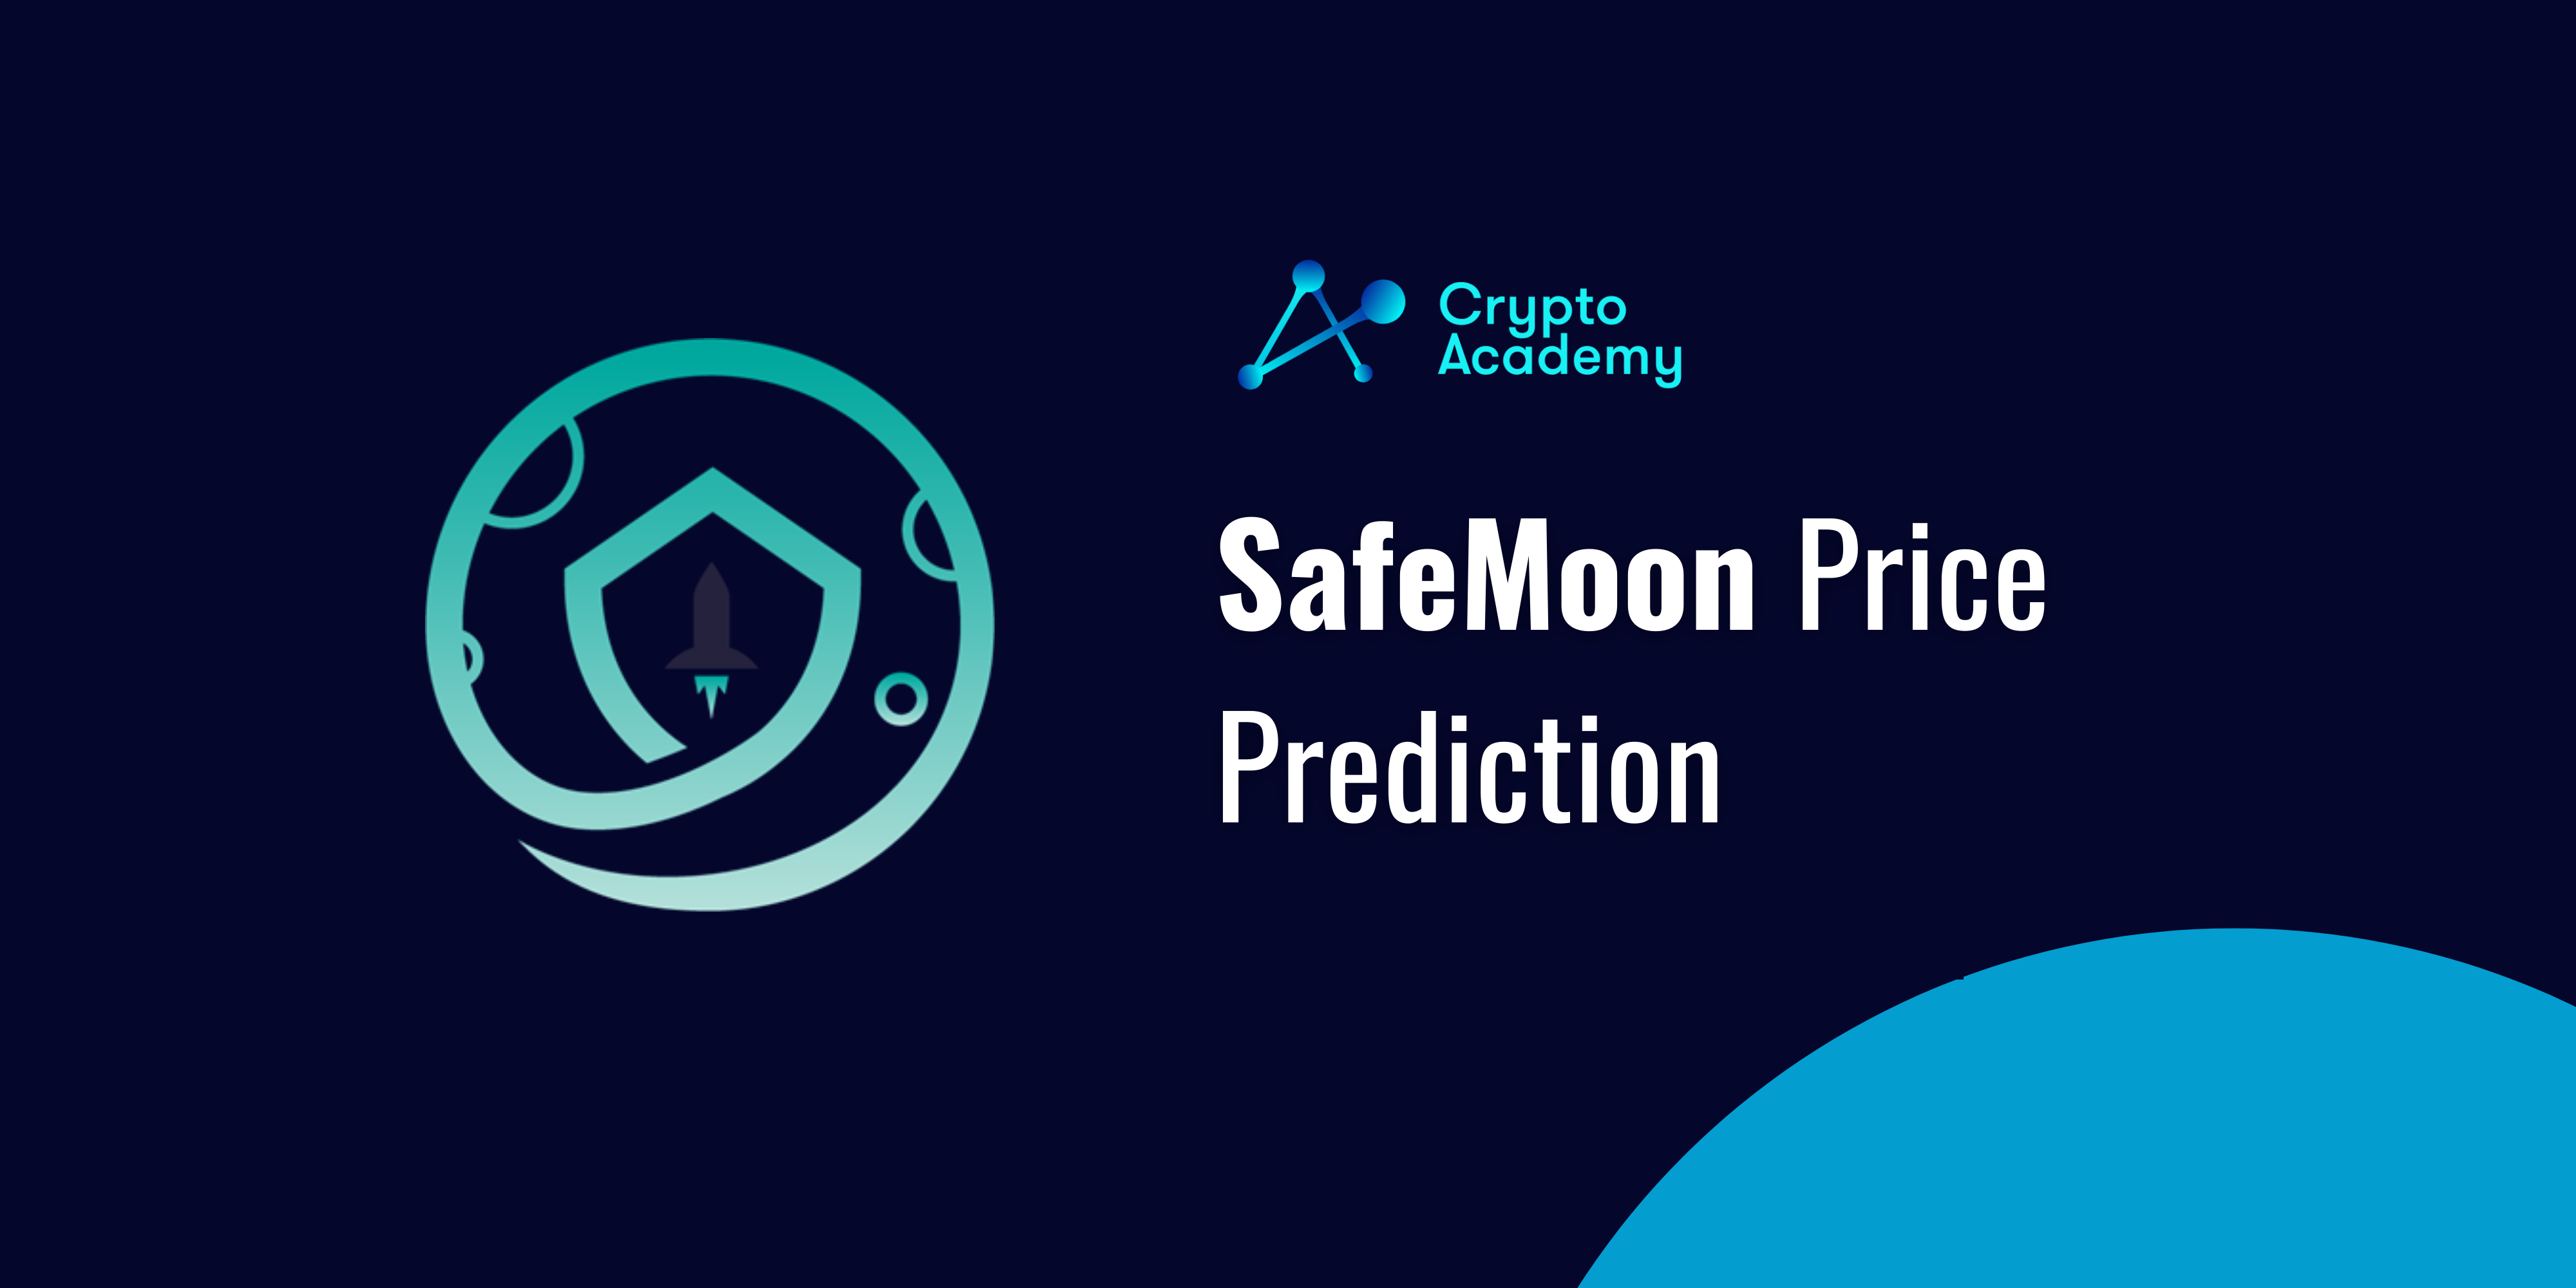 SafeMoon Price Prediction – What Does the Future Hold for SafeMoon?